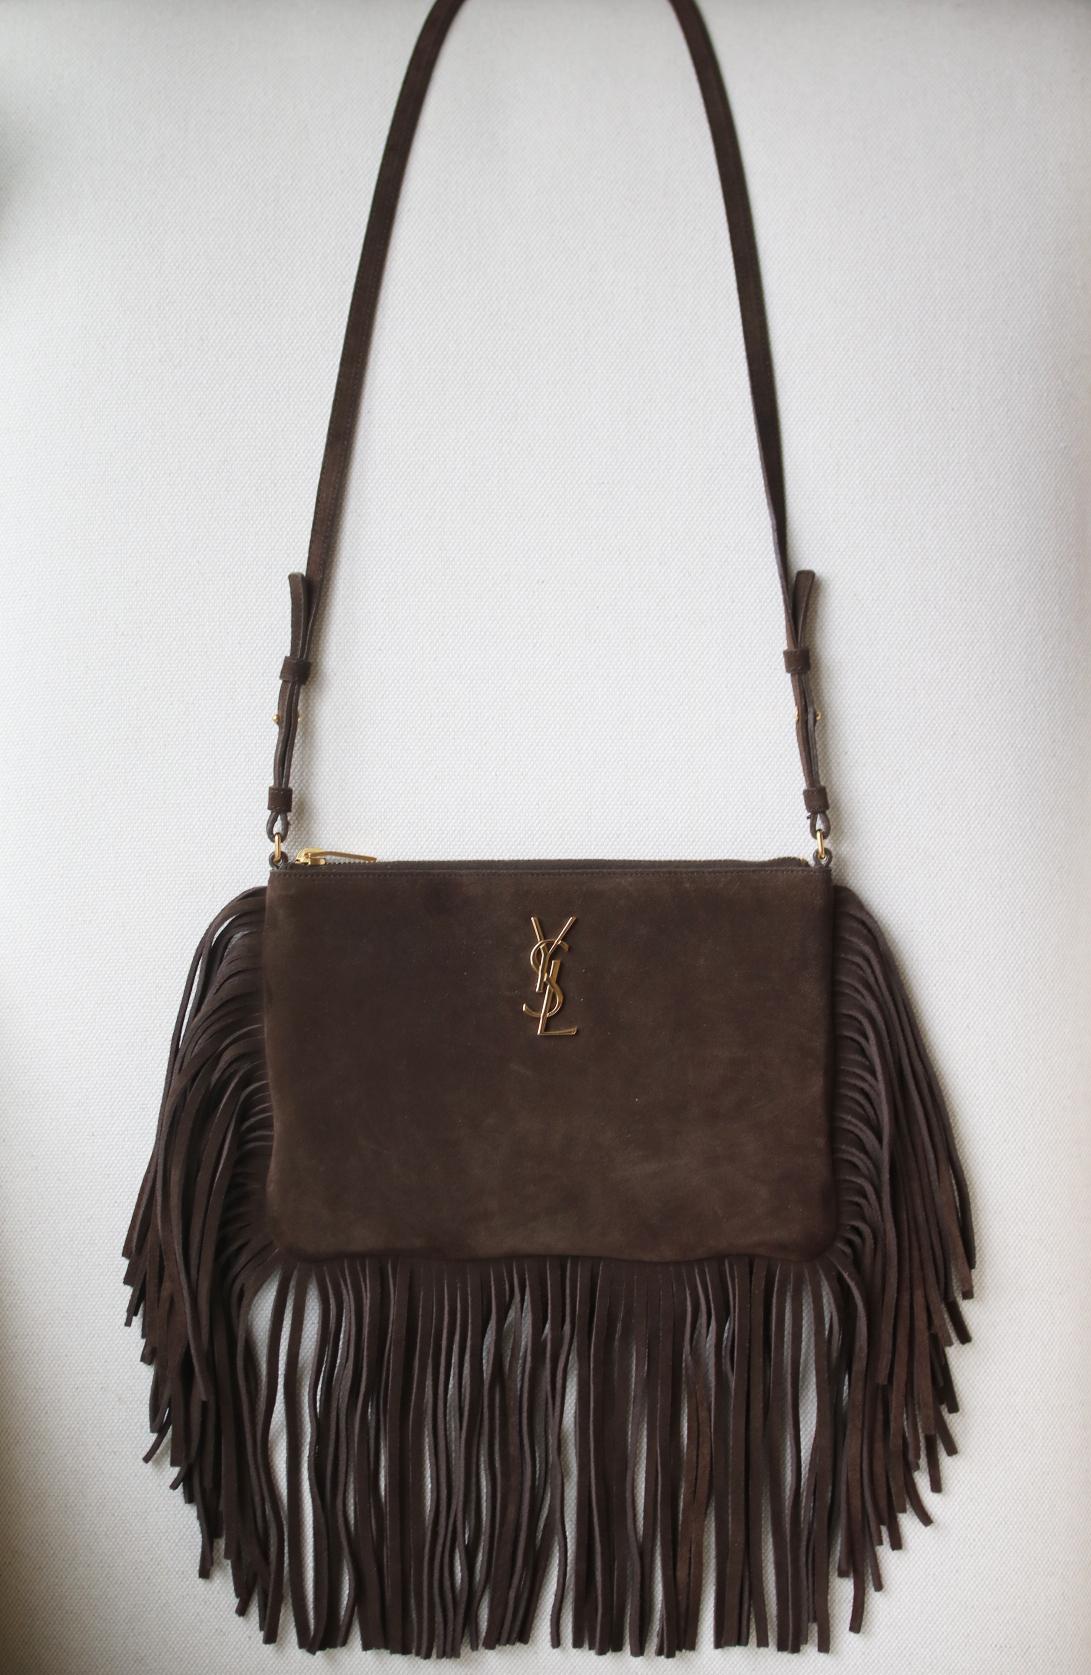 Saint Laurent fringe bag with metal interlocking YSL signature and removable, adjustable shoulder strap. Gold-tone hardware.  6 interior card slots, 2 slot pockets. Zip top closure. Grosgrain lining. 100% Calfskin. Colour: brown. Made in Italy. Does